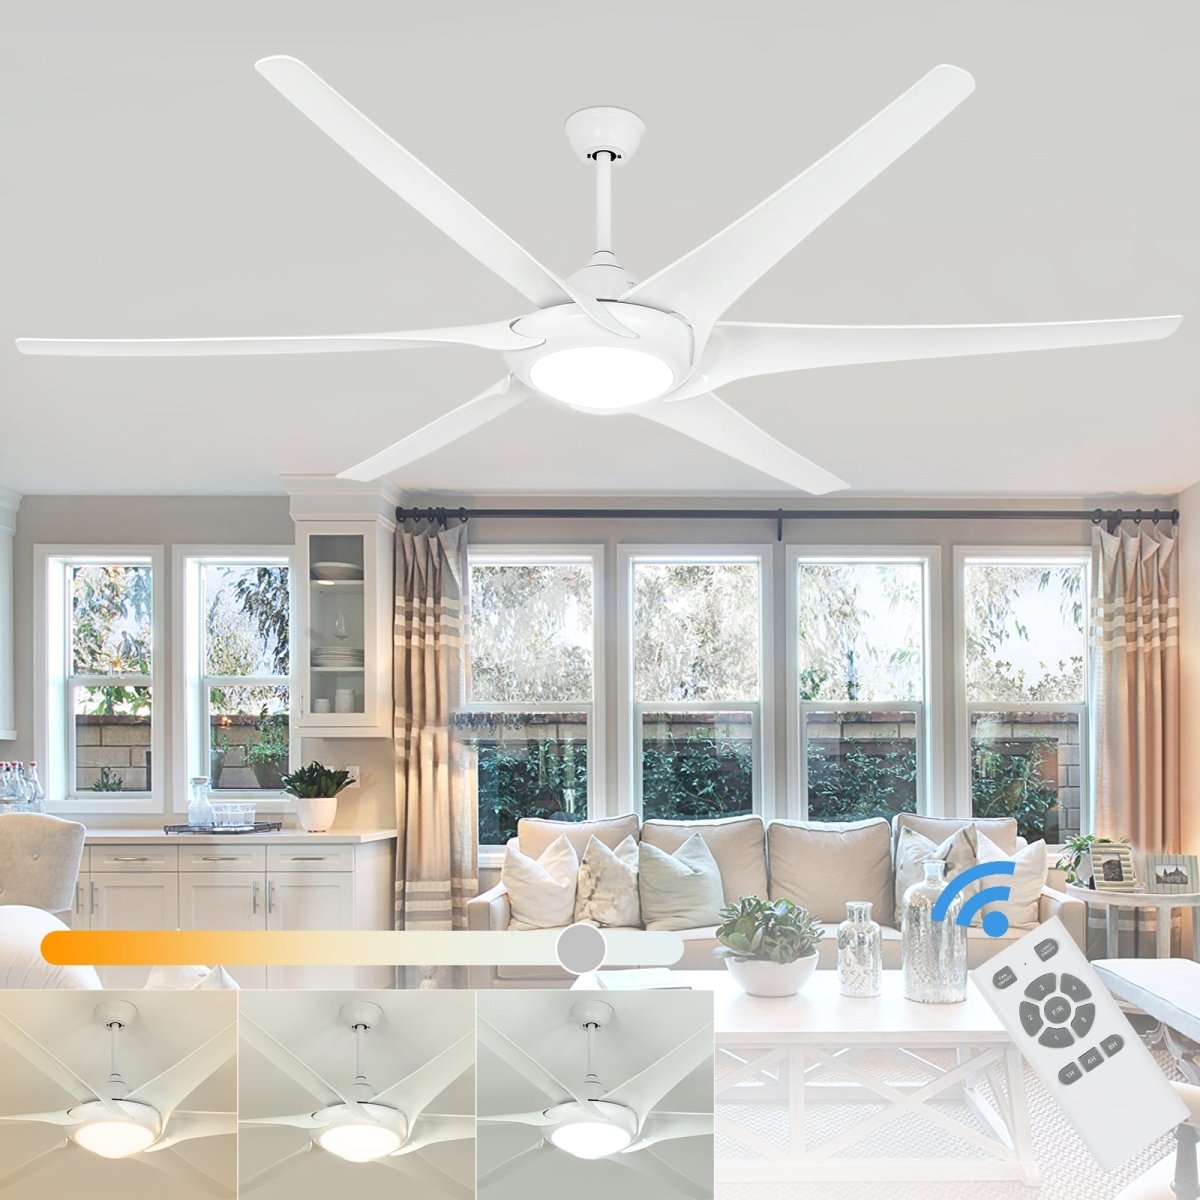 Depuley 80" Ceiling Fan with Lights, Large Reversible Ceiling Fan with 6 Blades, 24W Modern Ceiling Fans with 5-Speed for Living Room & Covered Outdoor, 3 Color Changeable, Timer - WS-FPZ33-24B 1 | DEPULEY